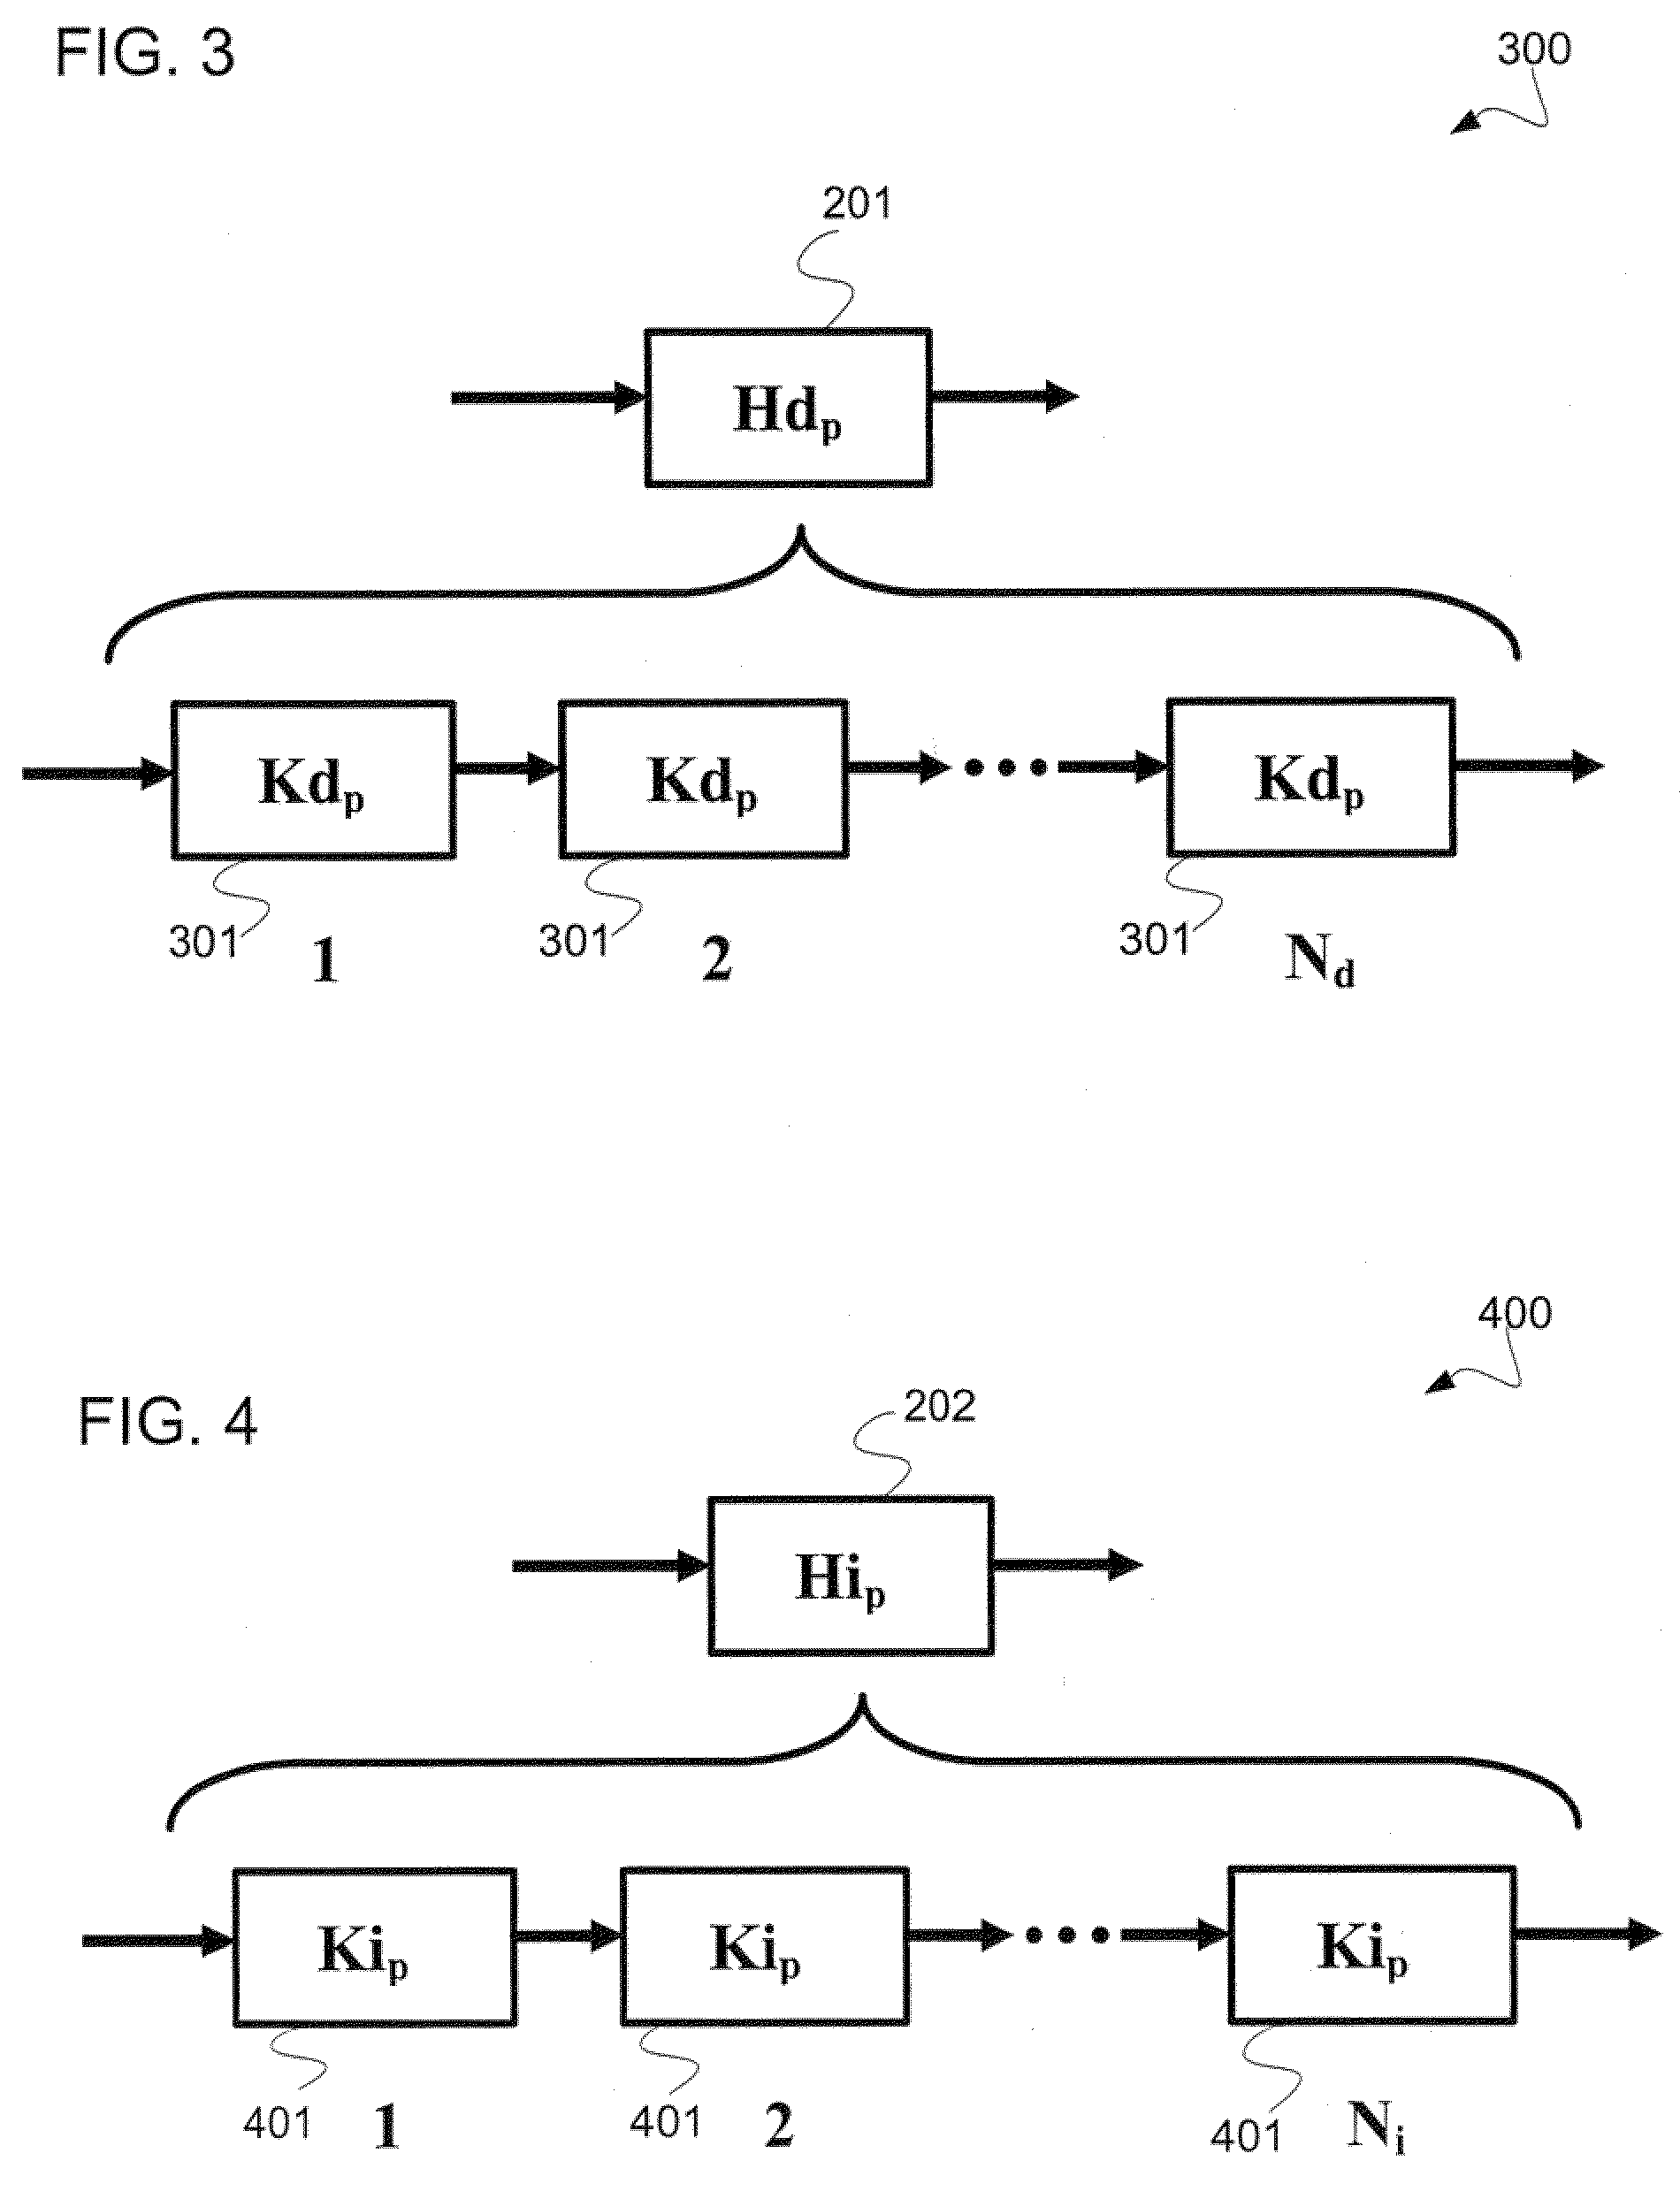 Apparatus for signal decomposition, analysis and reconstruction